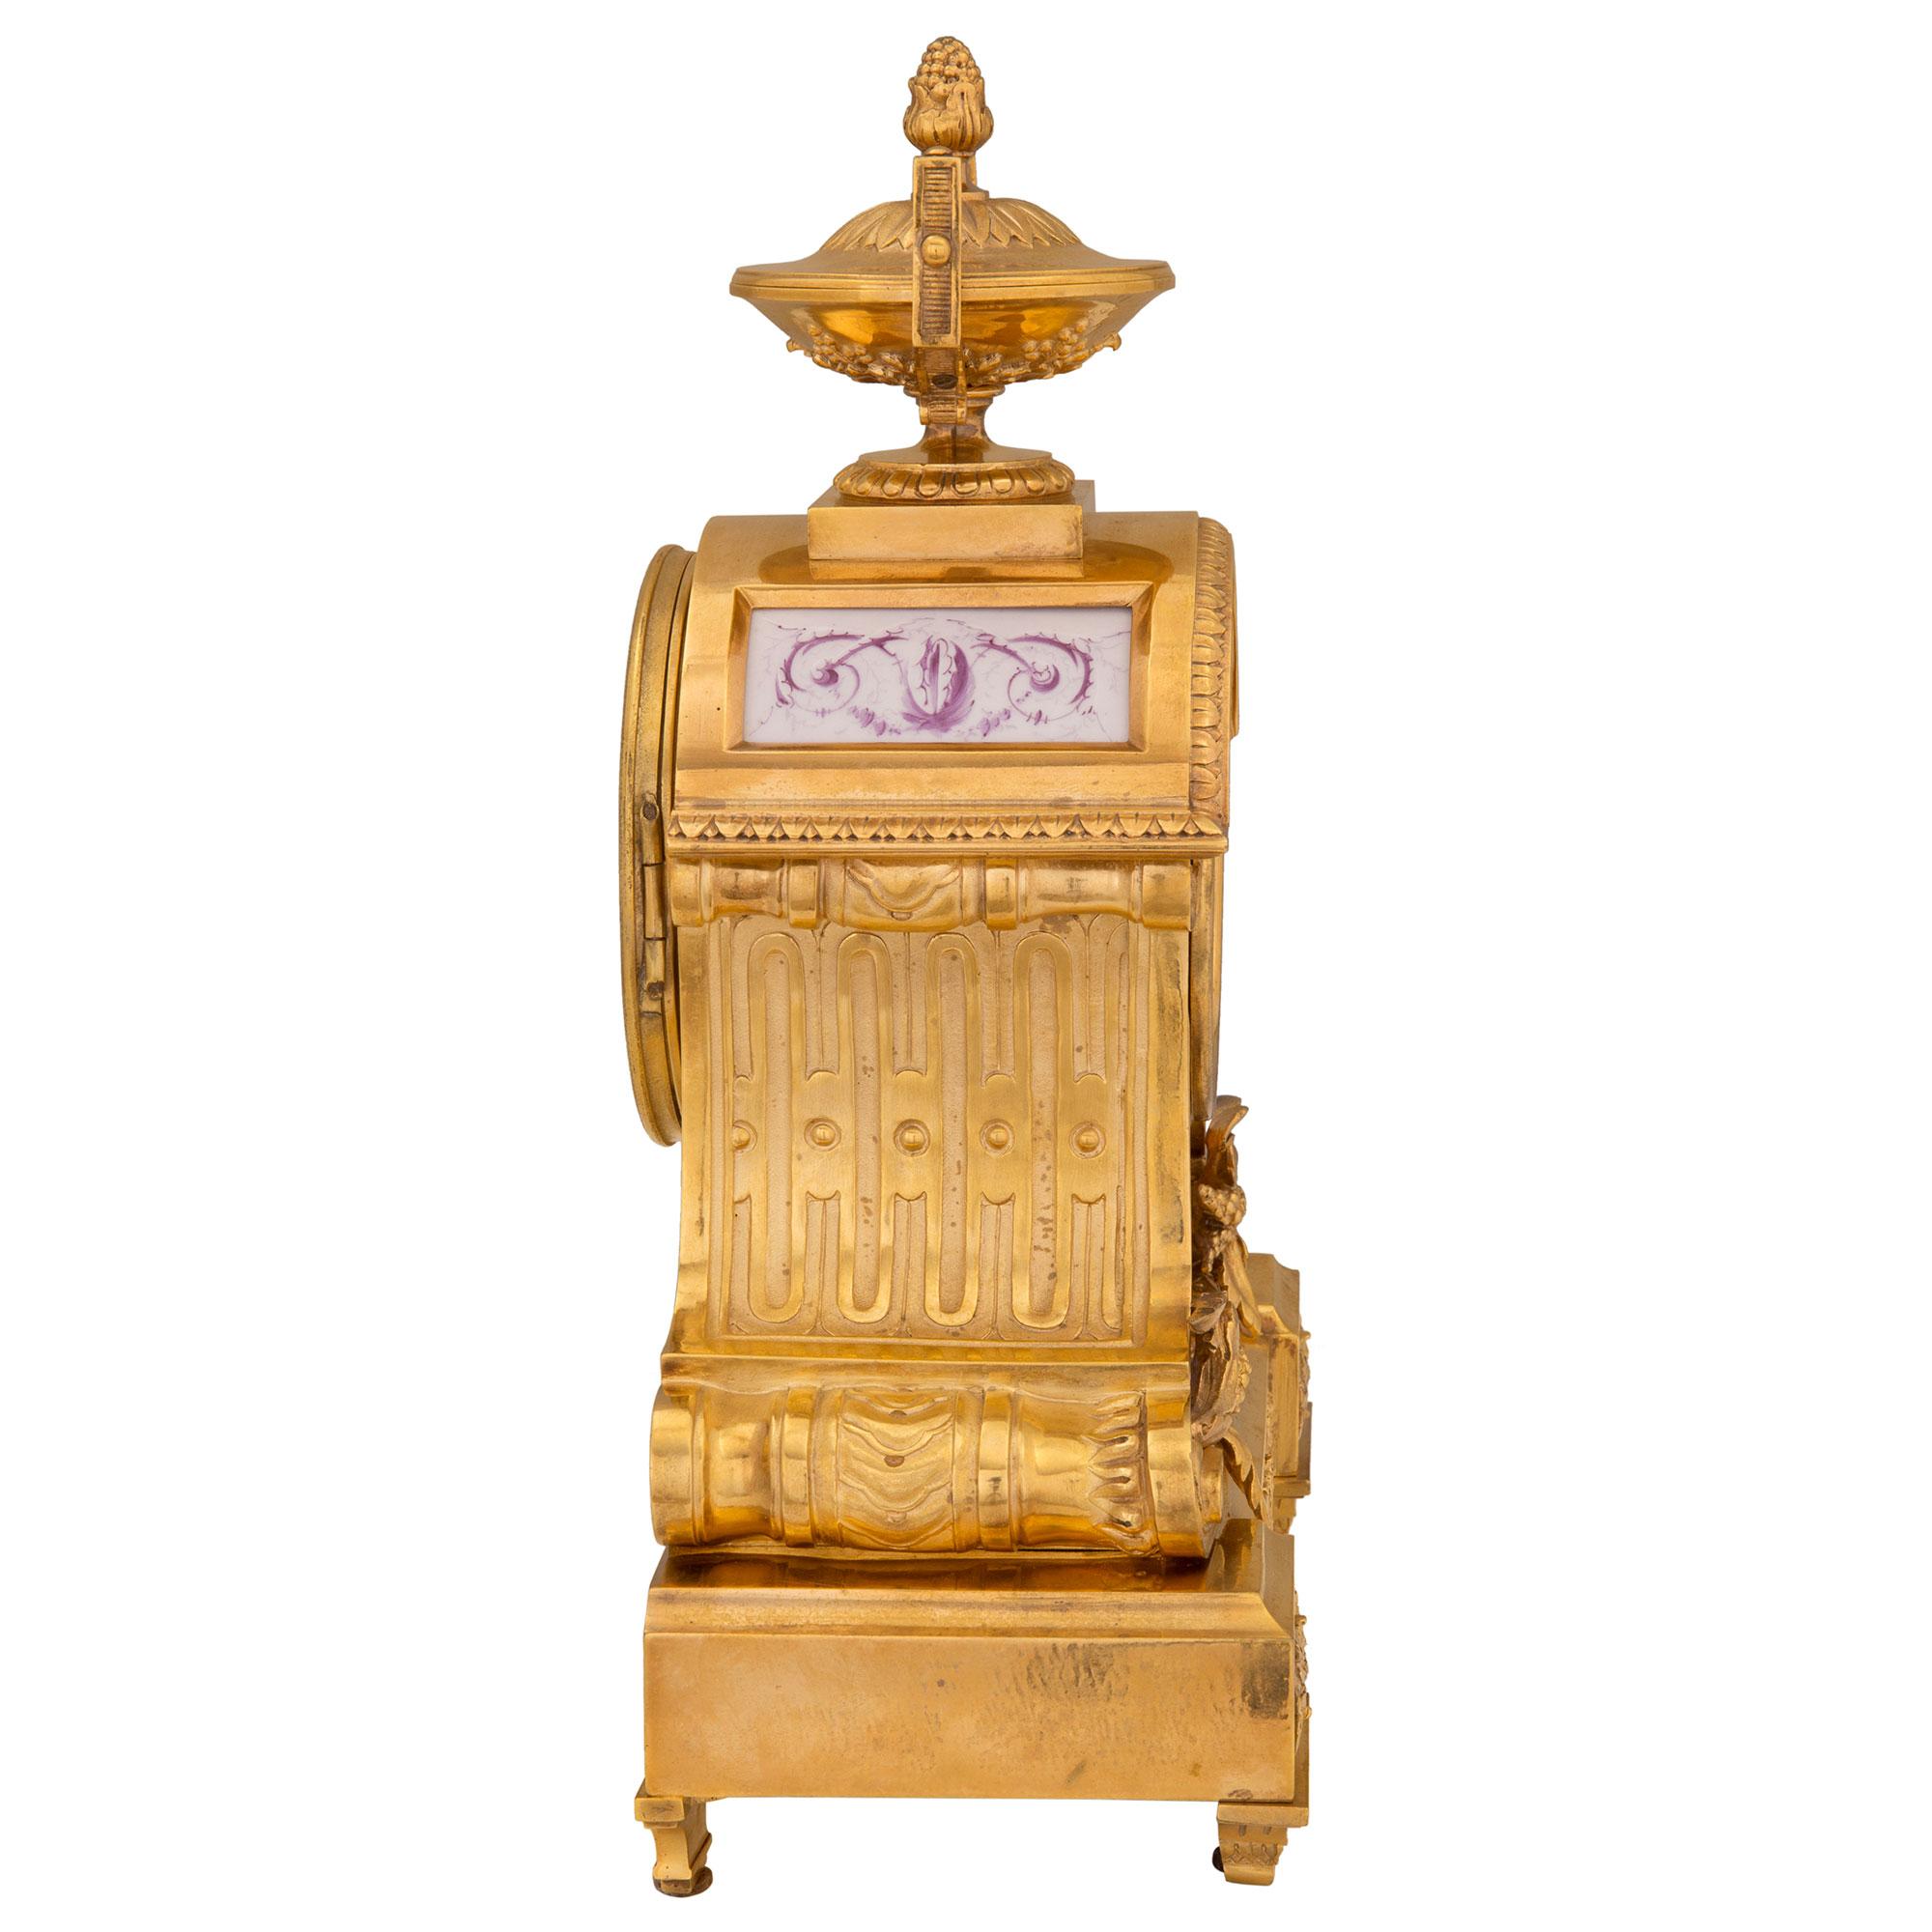 French 19th Century Louis XVI Style Ormolu and Porcelain Clock In Good Condition For Sale In West Palm Beach, FL